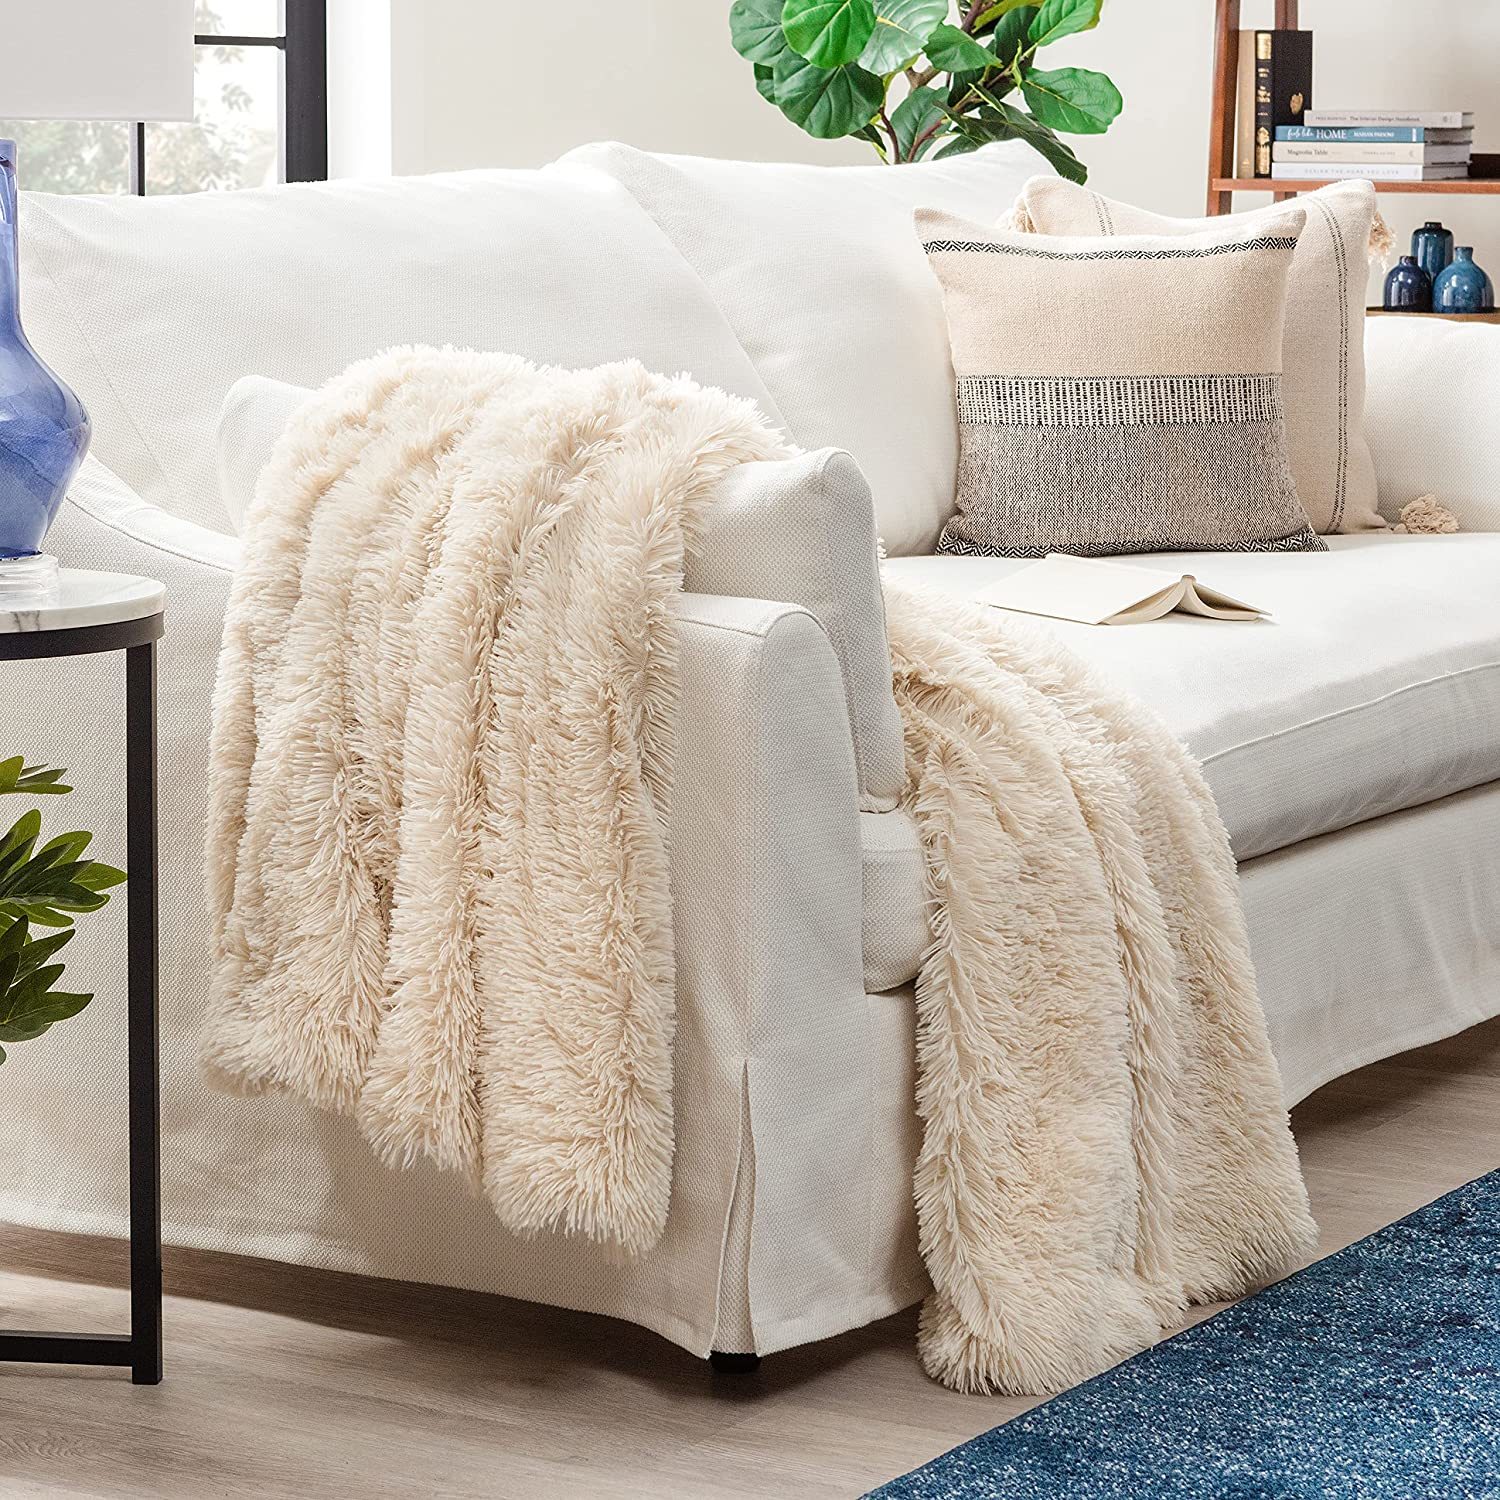 Primary image for Chanasya Super Soft Fuzzy Shaggy Faux Fur Throw Blanket - Chic Design Snuggly